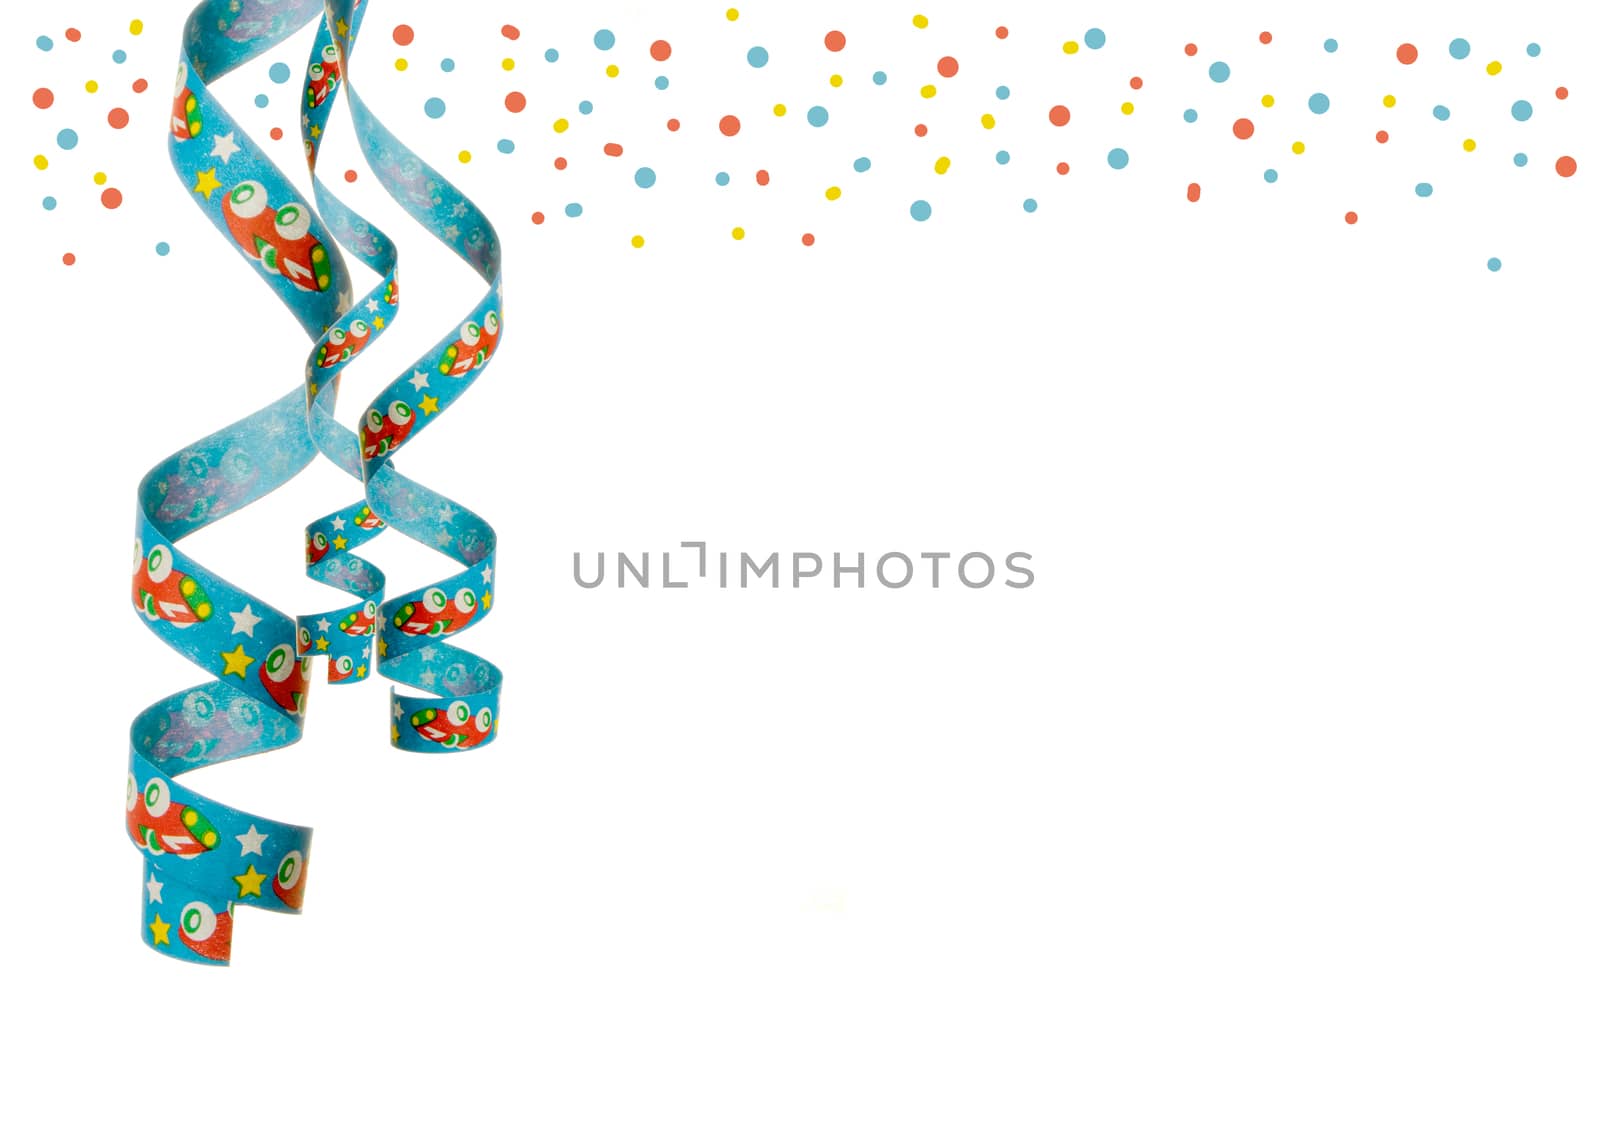 streamers and confetti as decoration for parties, sylvester isolated, hanging with white background 